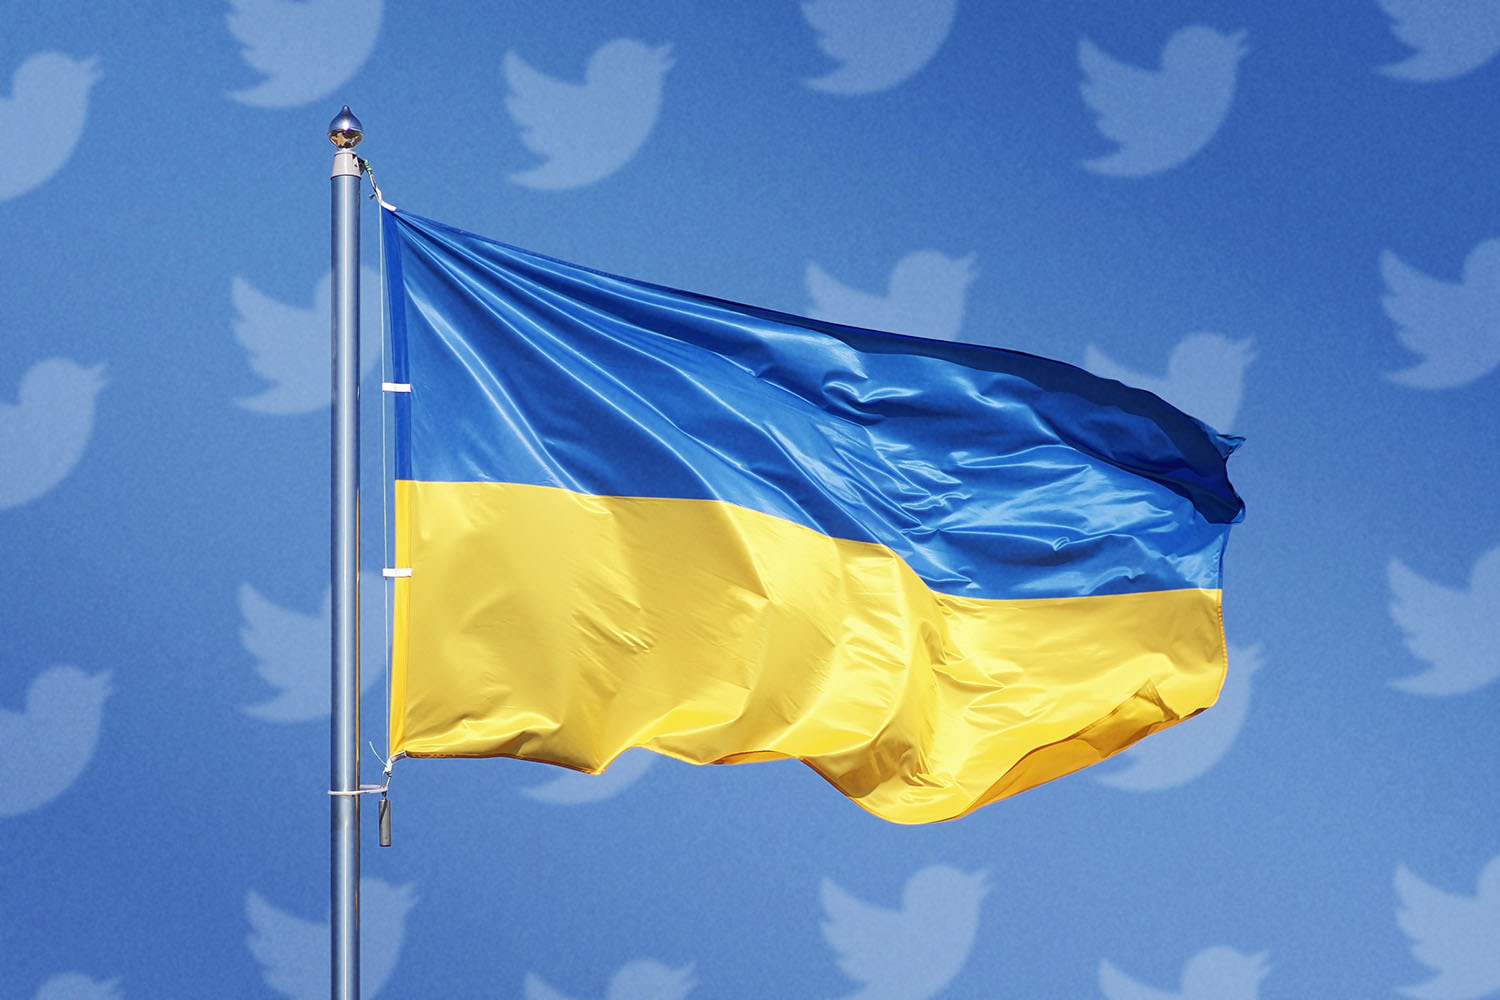 The Ukrainian flag in yellow and blue flying with the Twitter icon overlaid on top